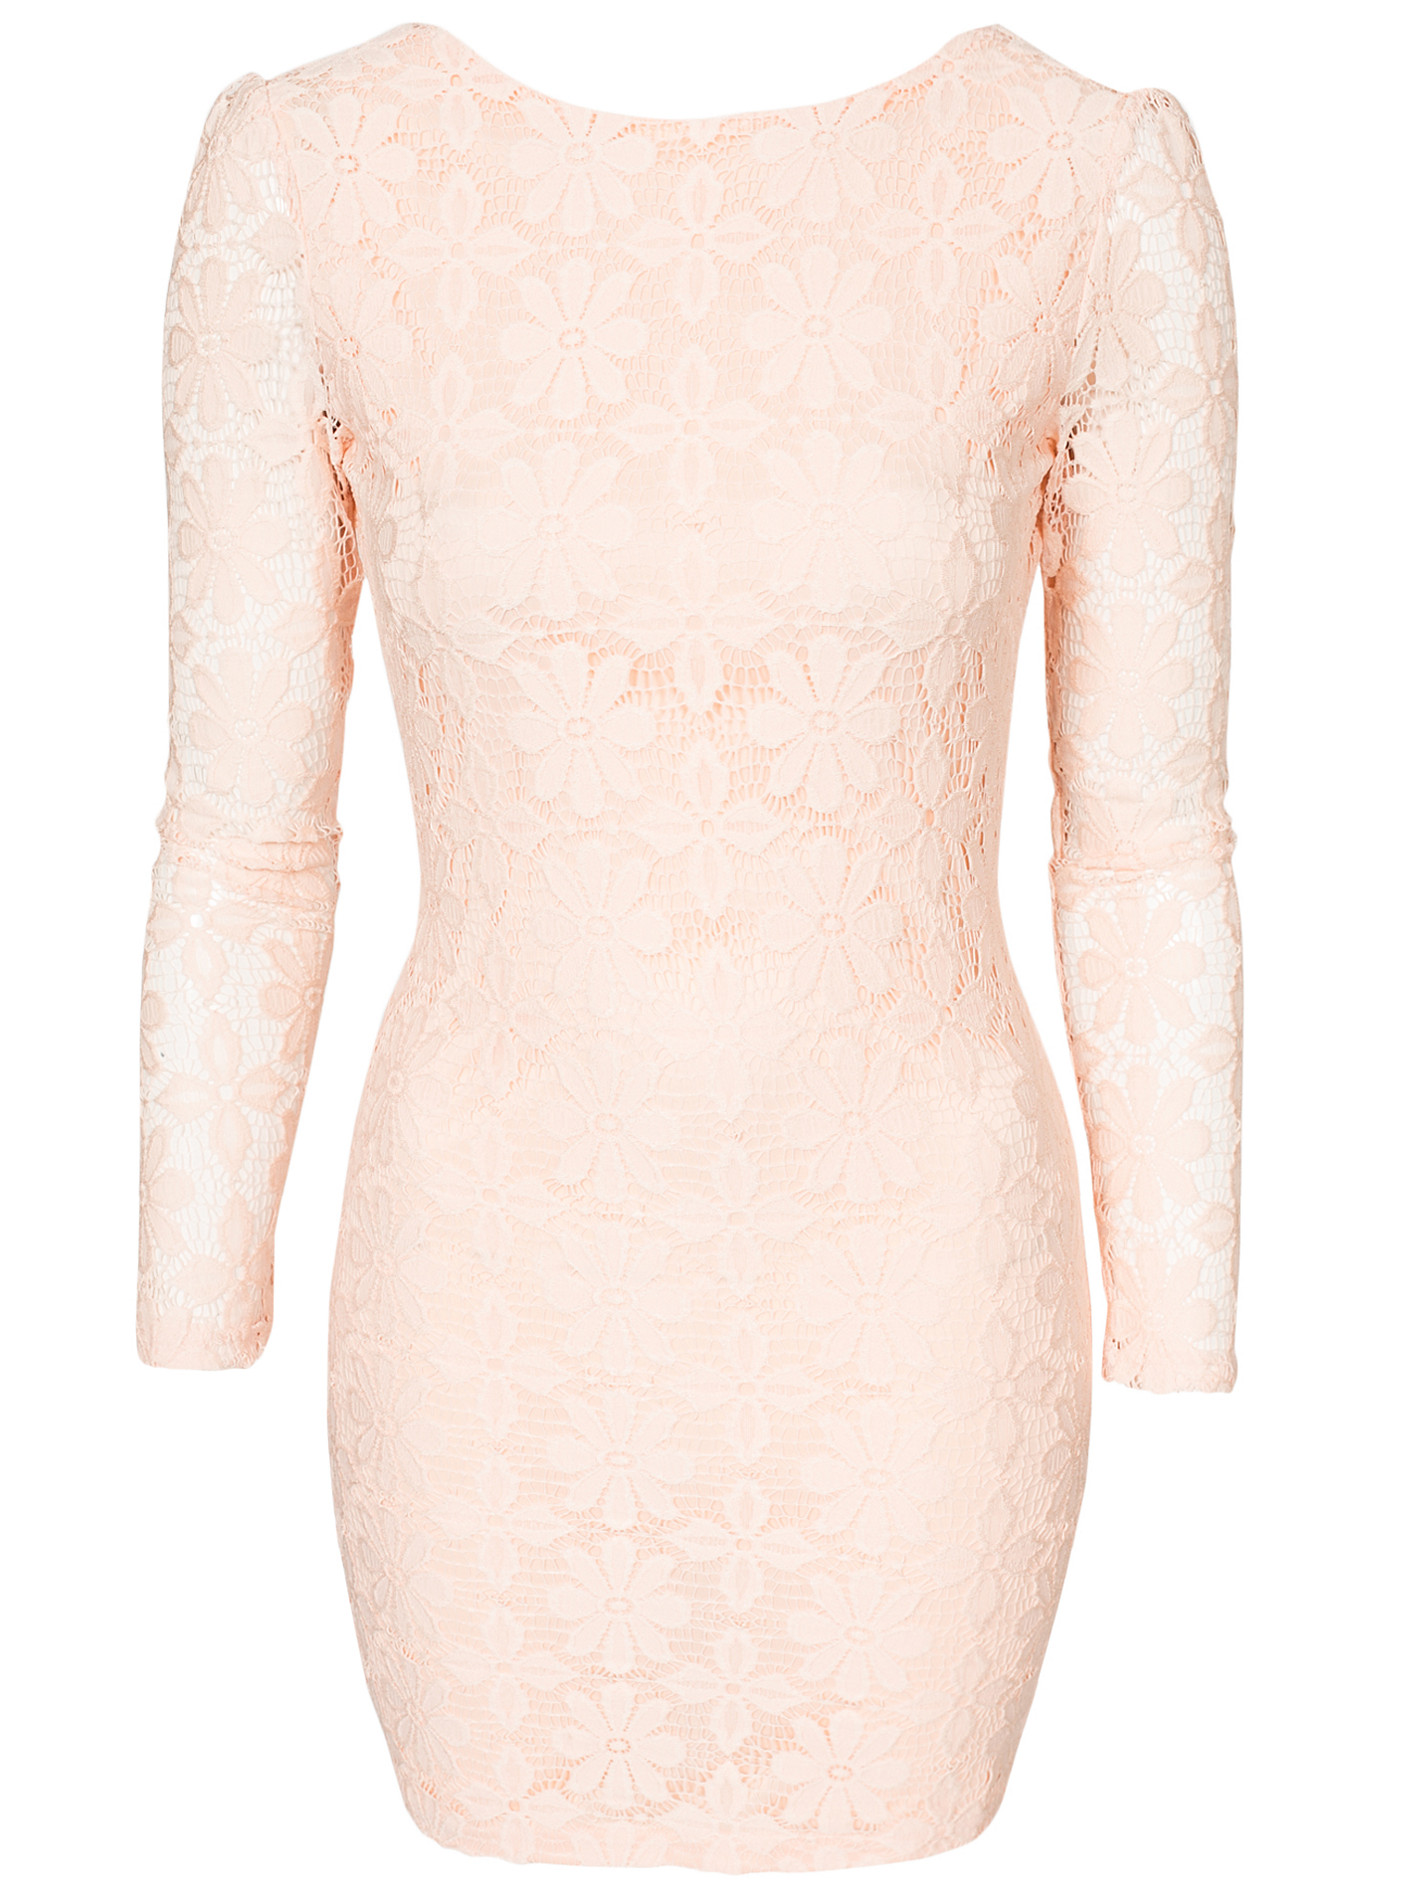 F2323-2 Floral Lace Bodycon Dress